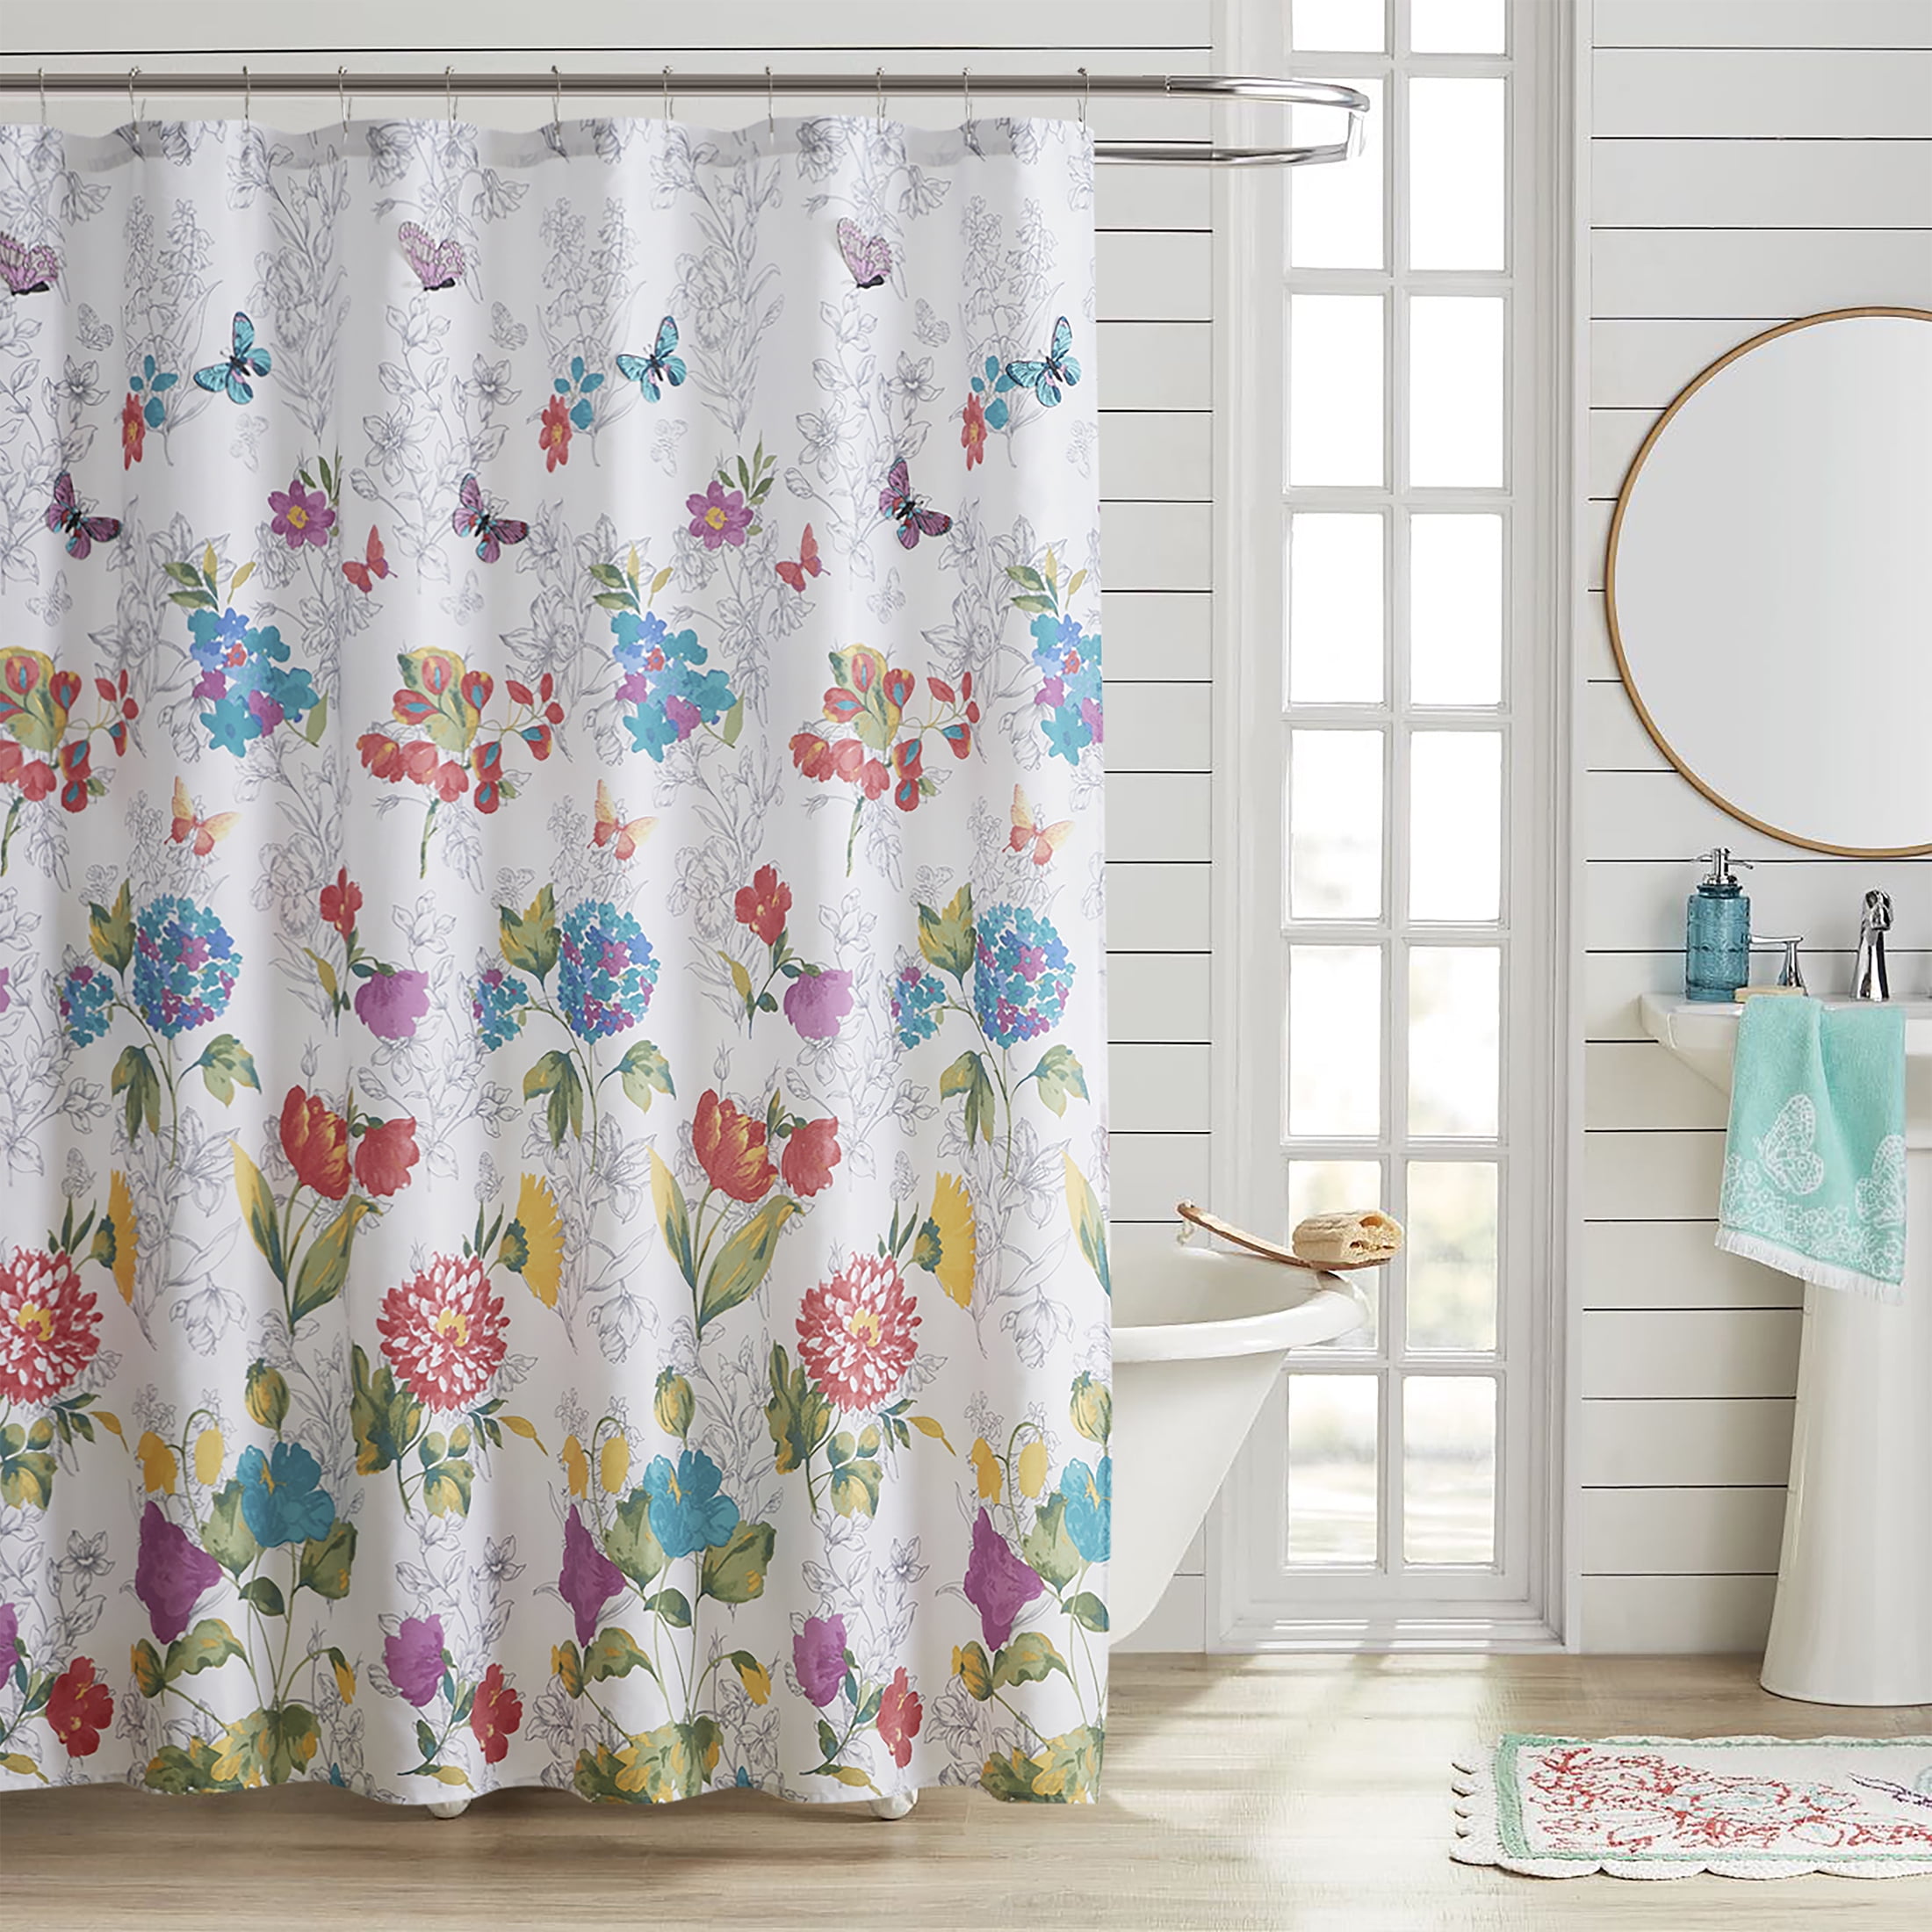 Flower And Butterfly Shower Curtain set with hooks Bathroom decor 71inch Long 